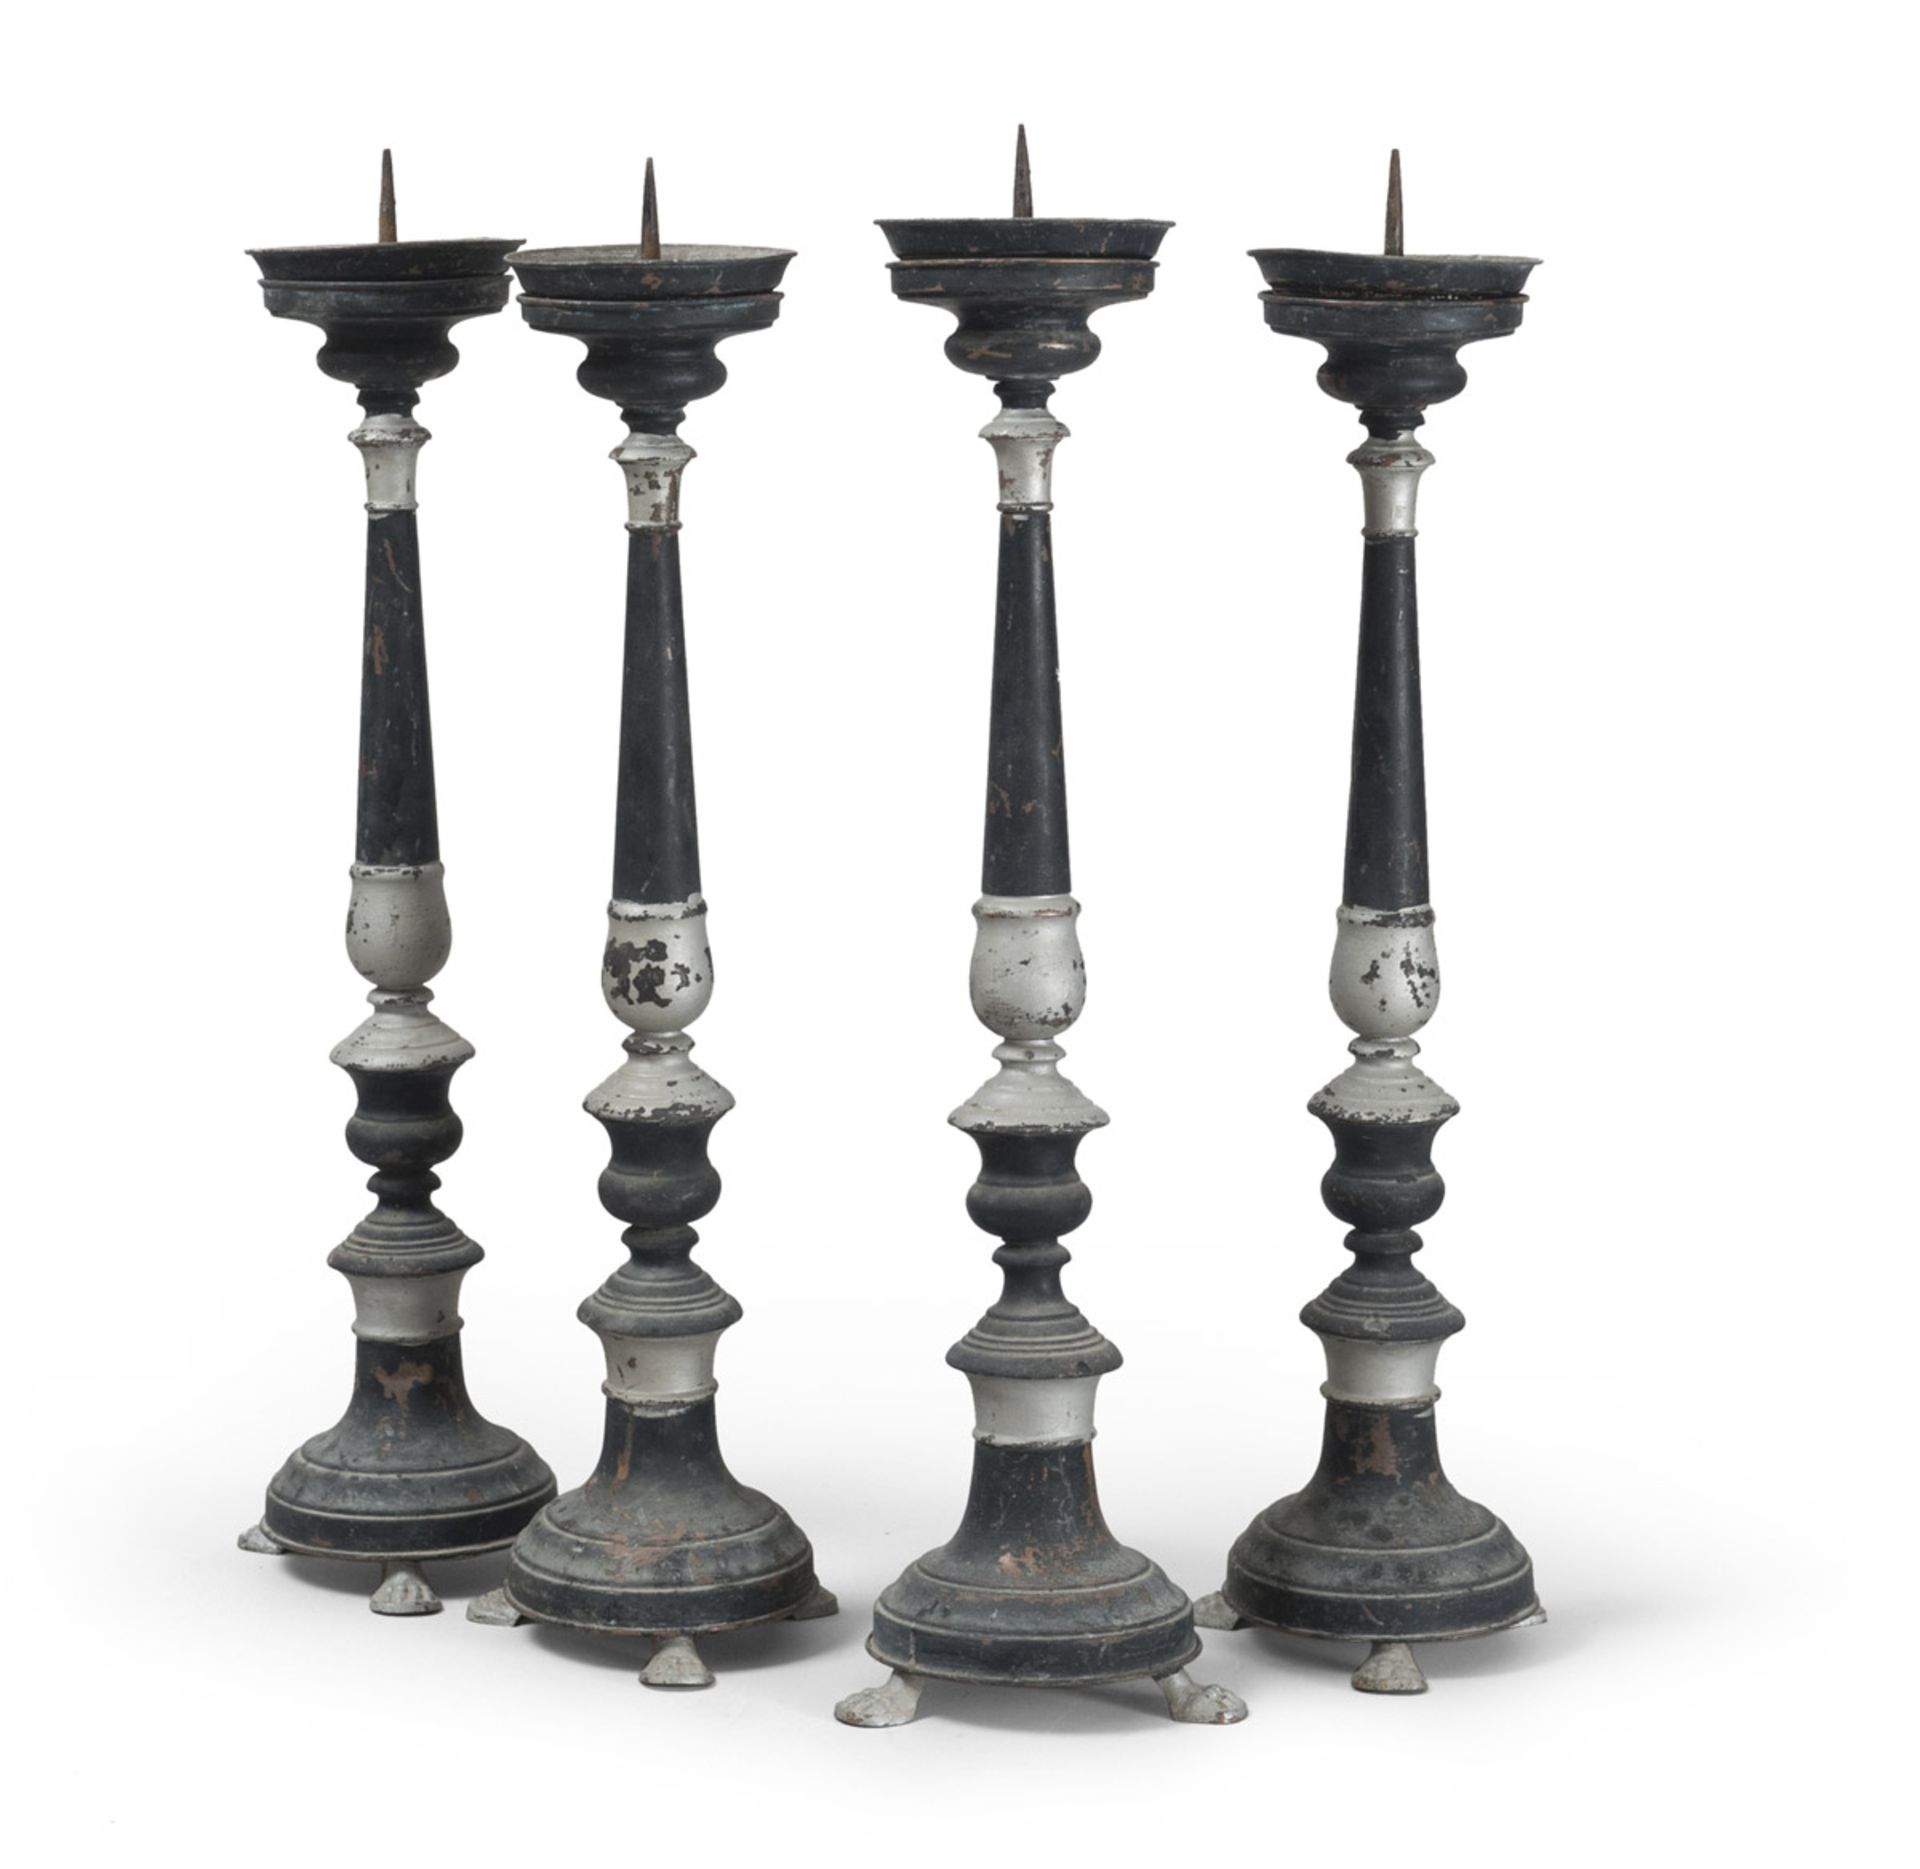 FOUR METAL CANDLESTICKS, SOUTHERN ITALY 19TH CENTURY black lacquered, claw feet. h. cm. 66. Defects.